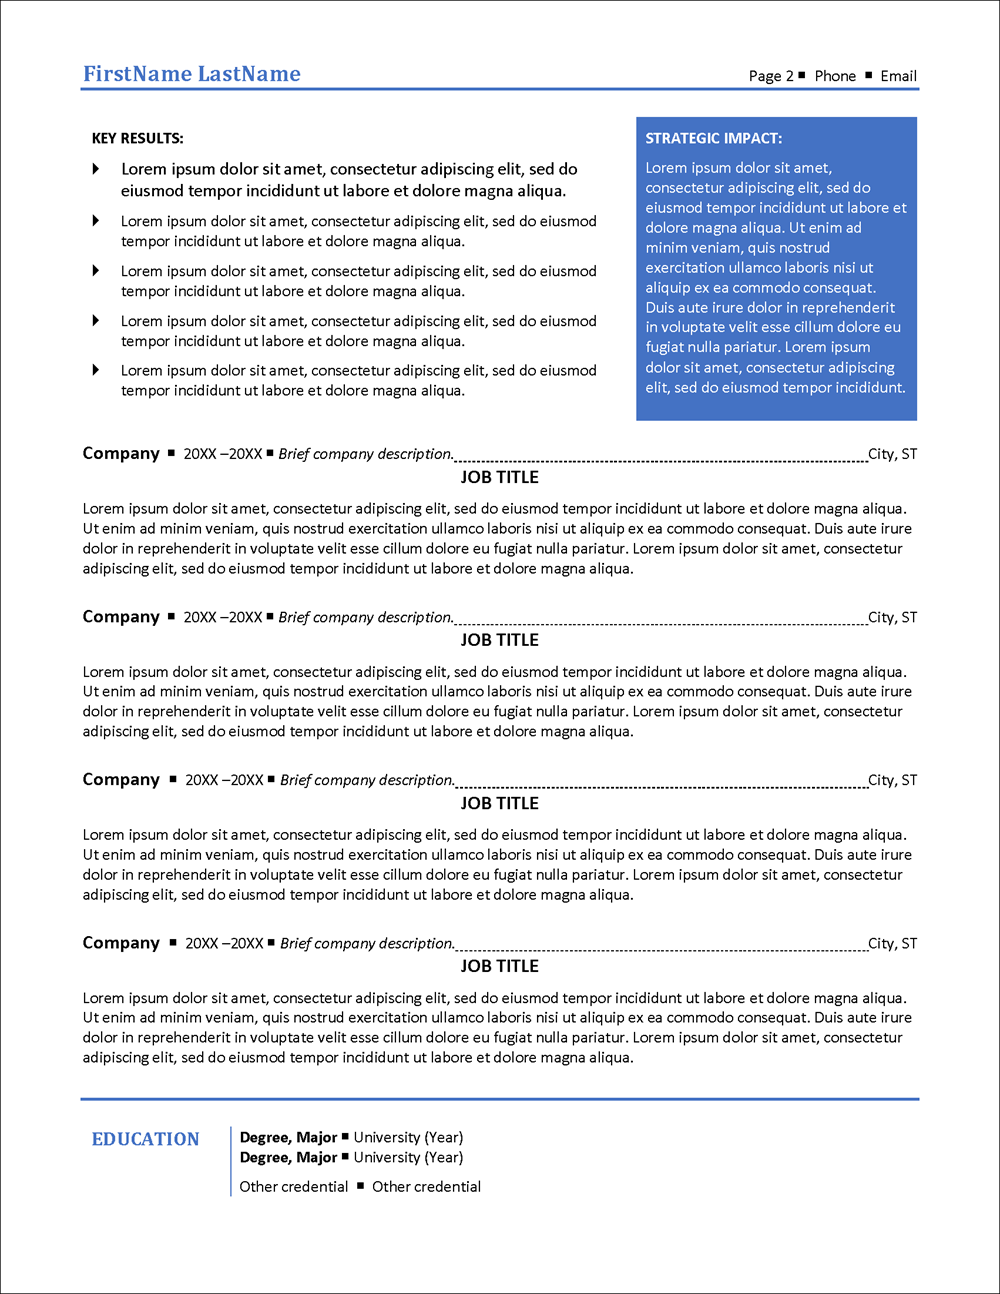 Upward Bound Combination Format Resume Template Page 2